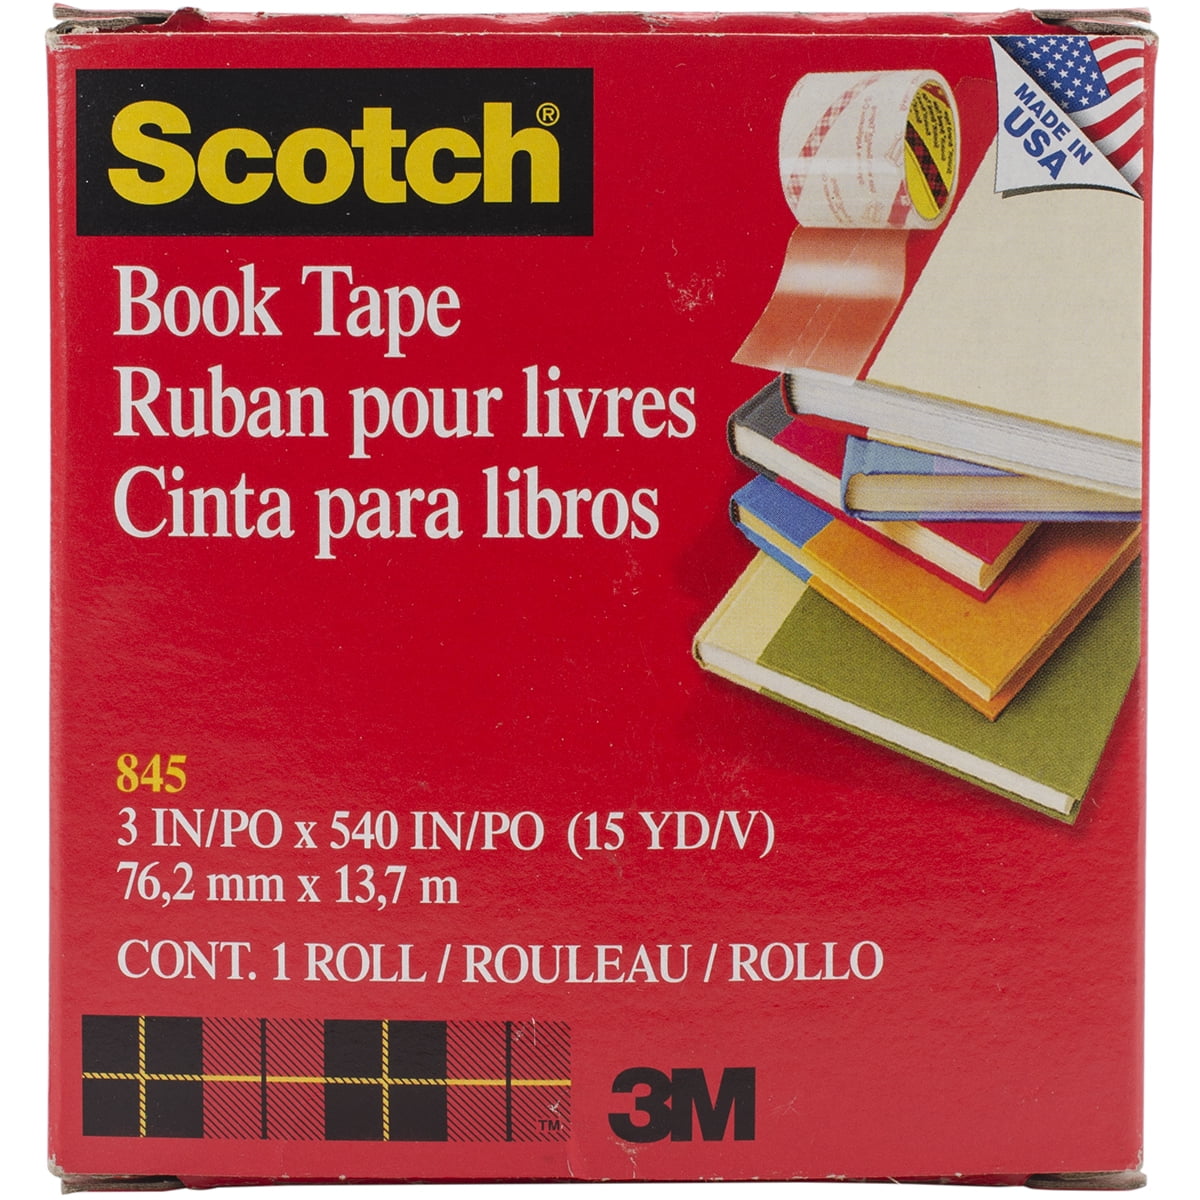 Scotch 845 Book Tape, 1.50 Inches x 15 Yards, 3 Inch Core, Crystal